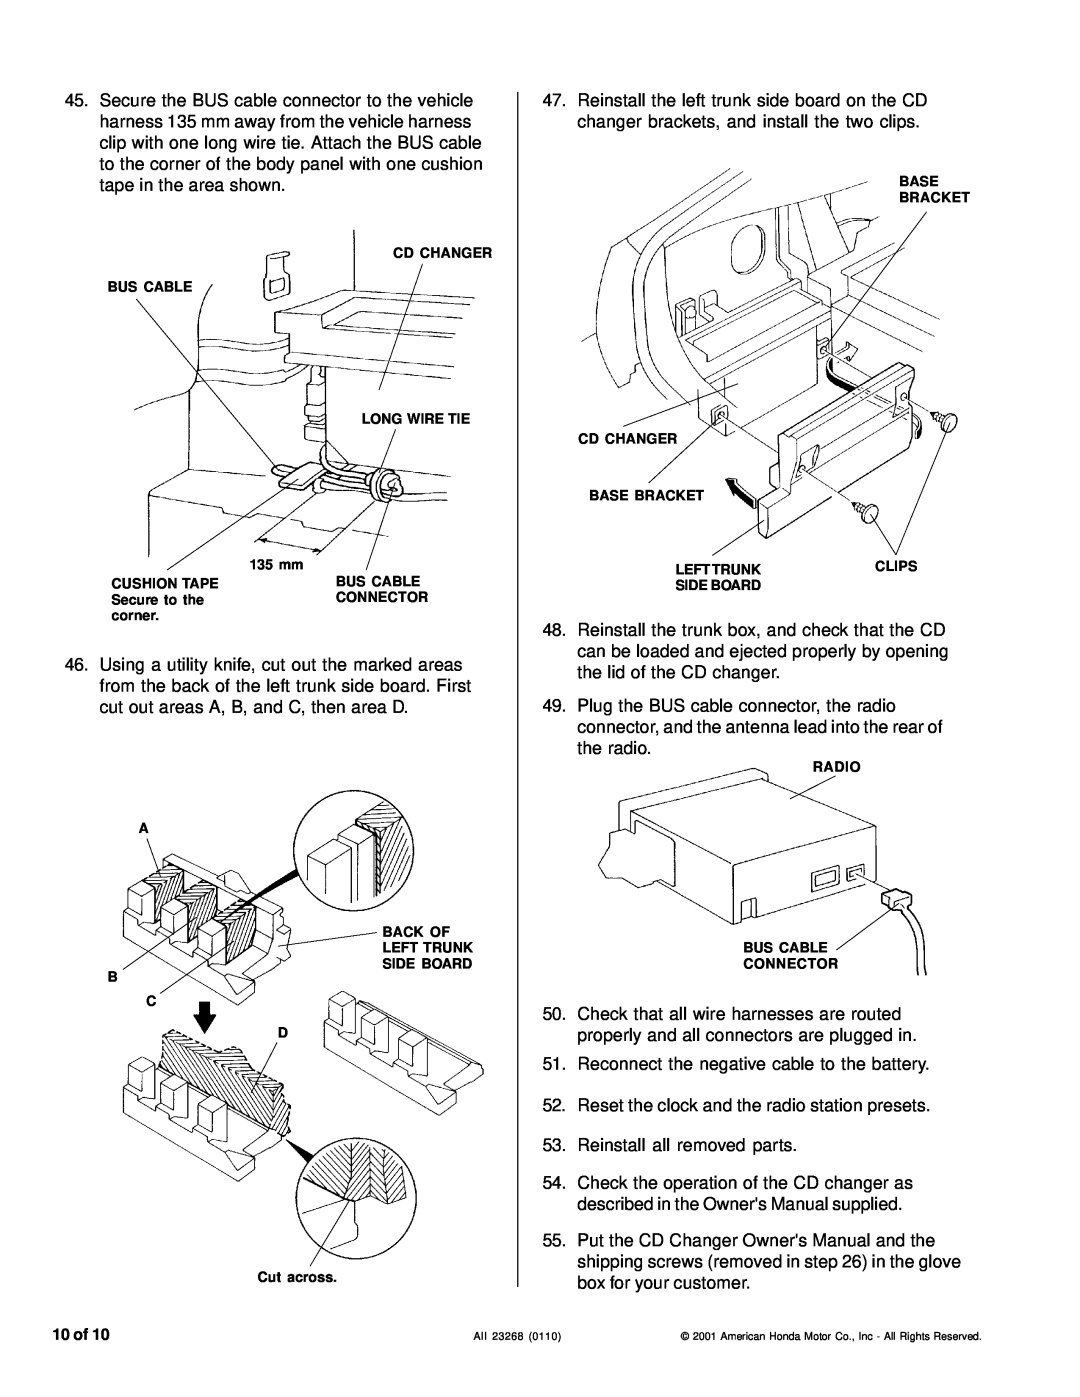 Honda Power Equipment CD Changer installation instructions Reconnect the negative cable to the battery 